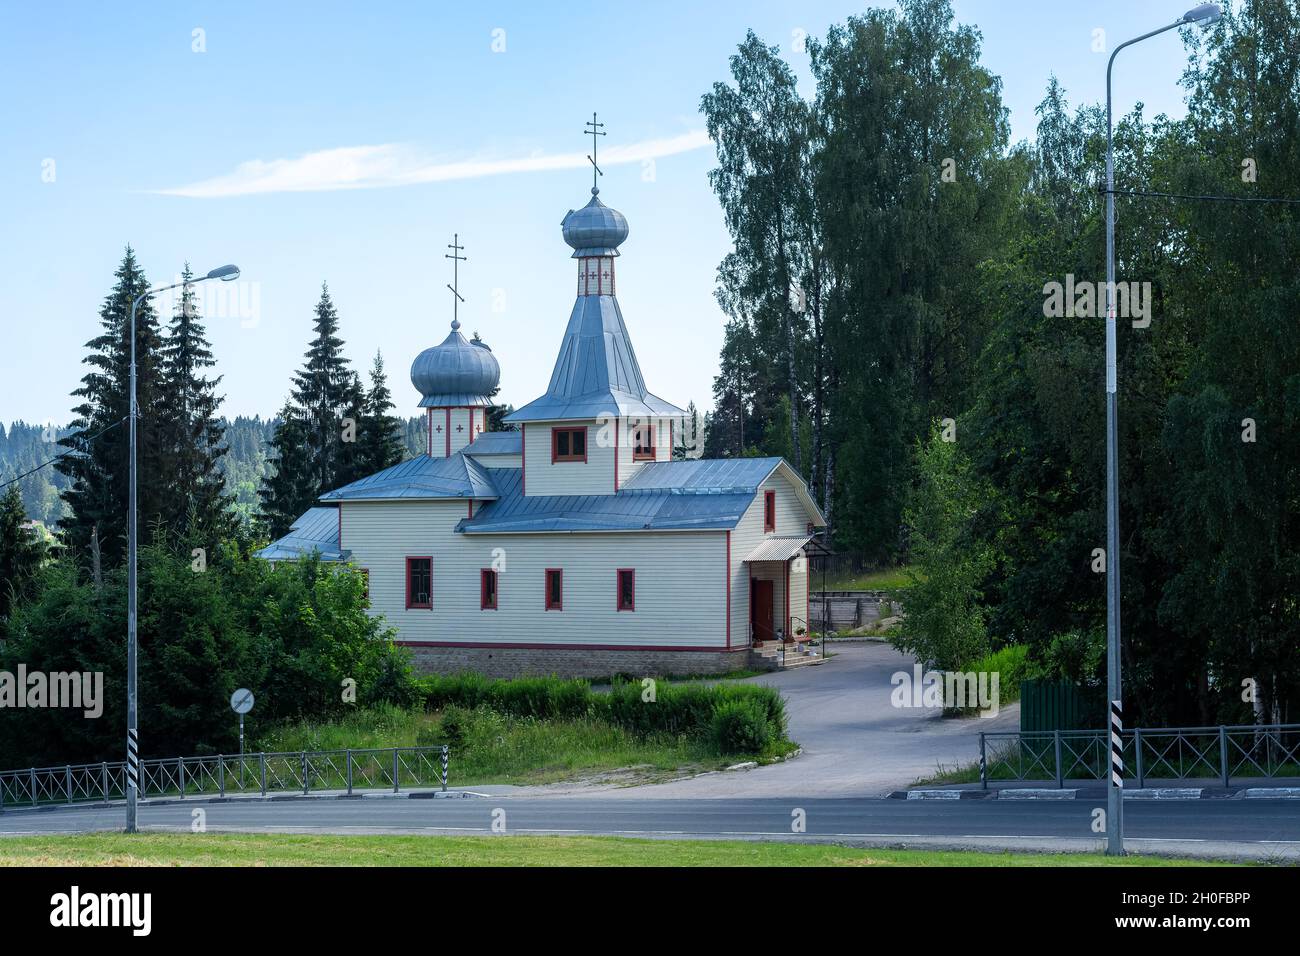 Orthodox wooden church by the road, surrounded by forest in the town of Lahdenpohya in Karelia. Stock Photo